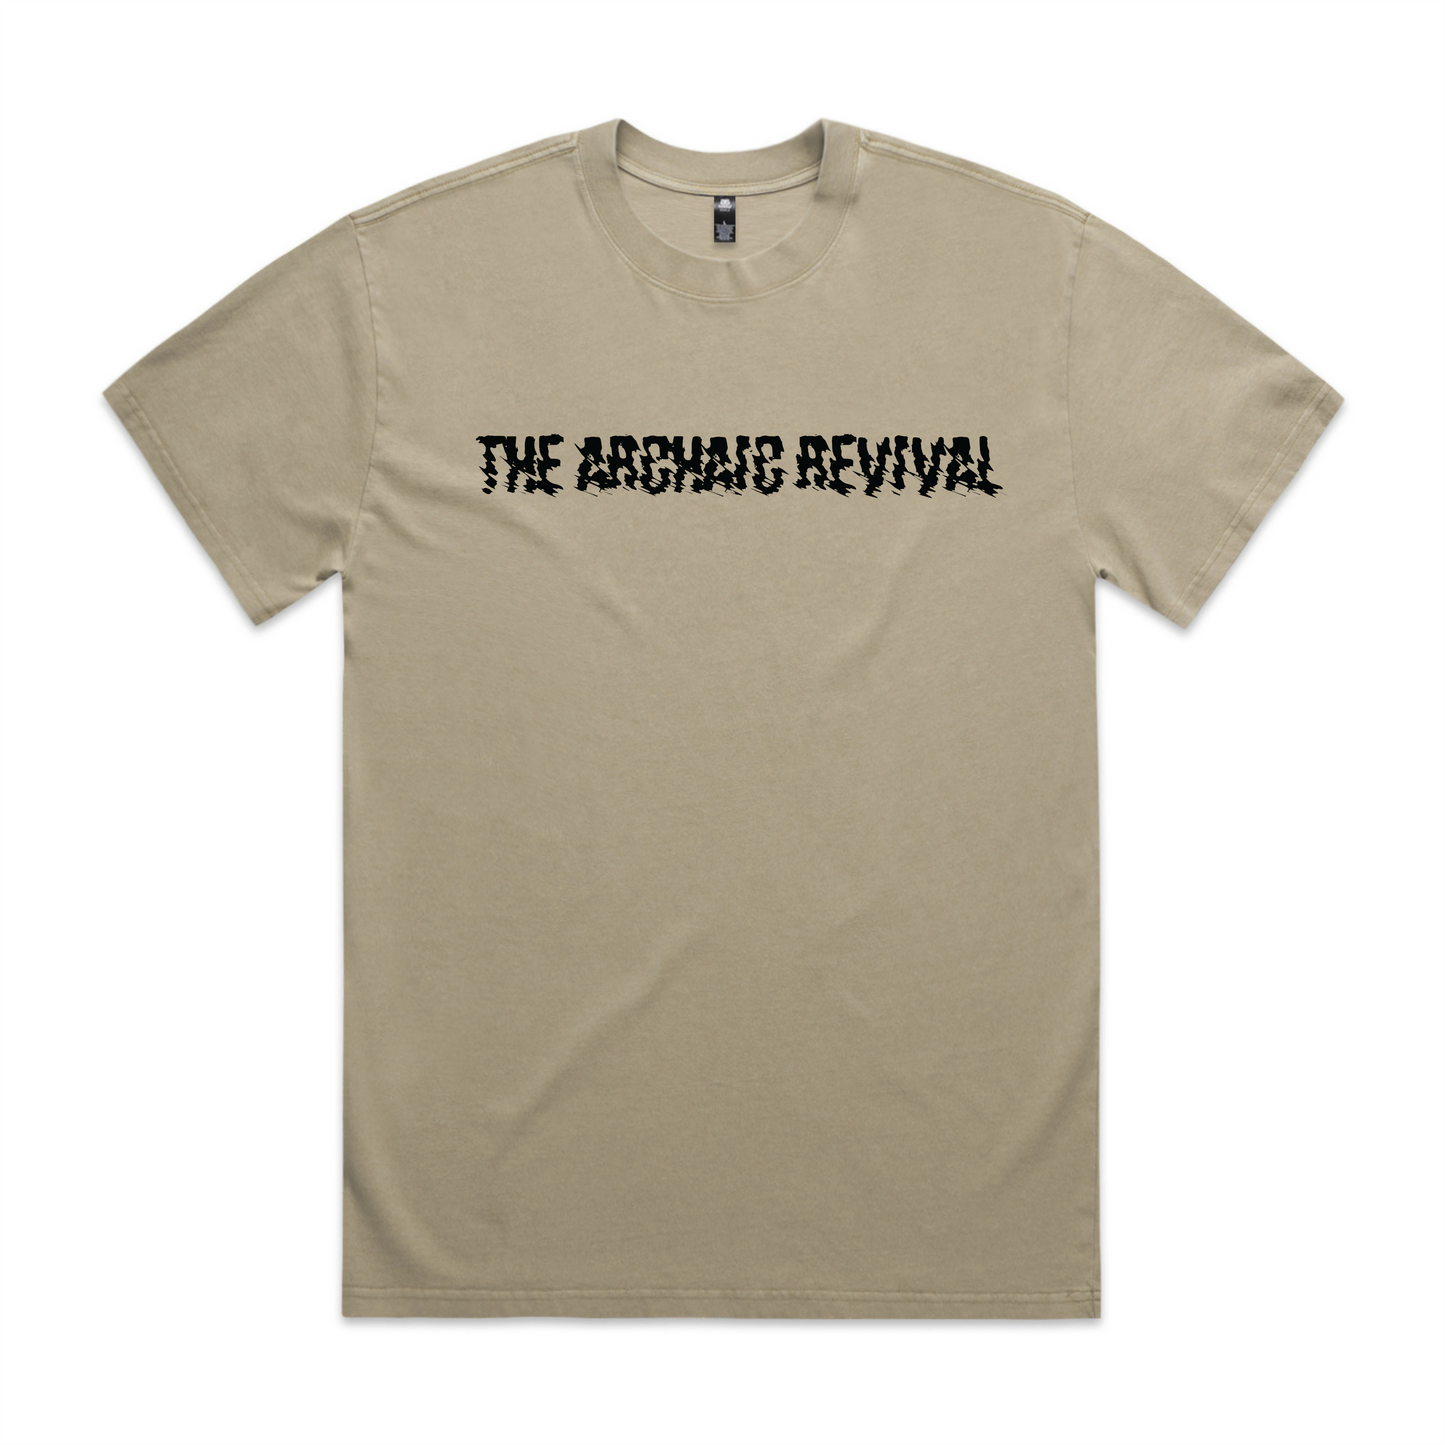 The Archaic Revival Issue 001